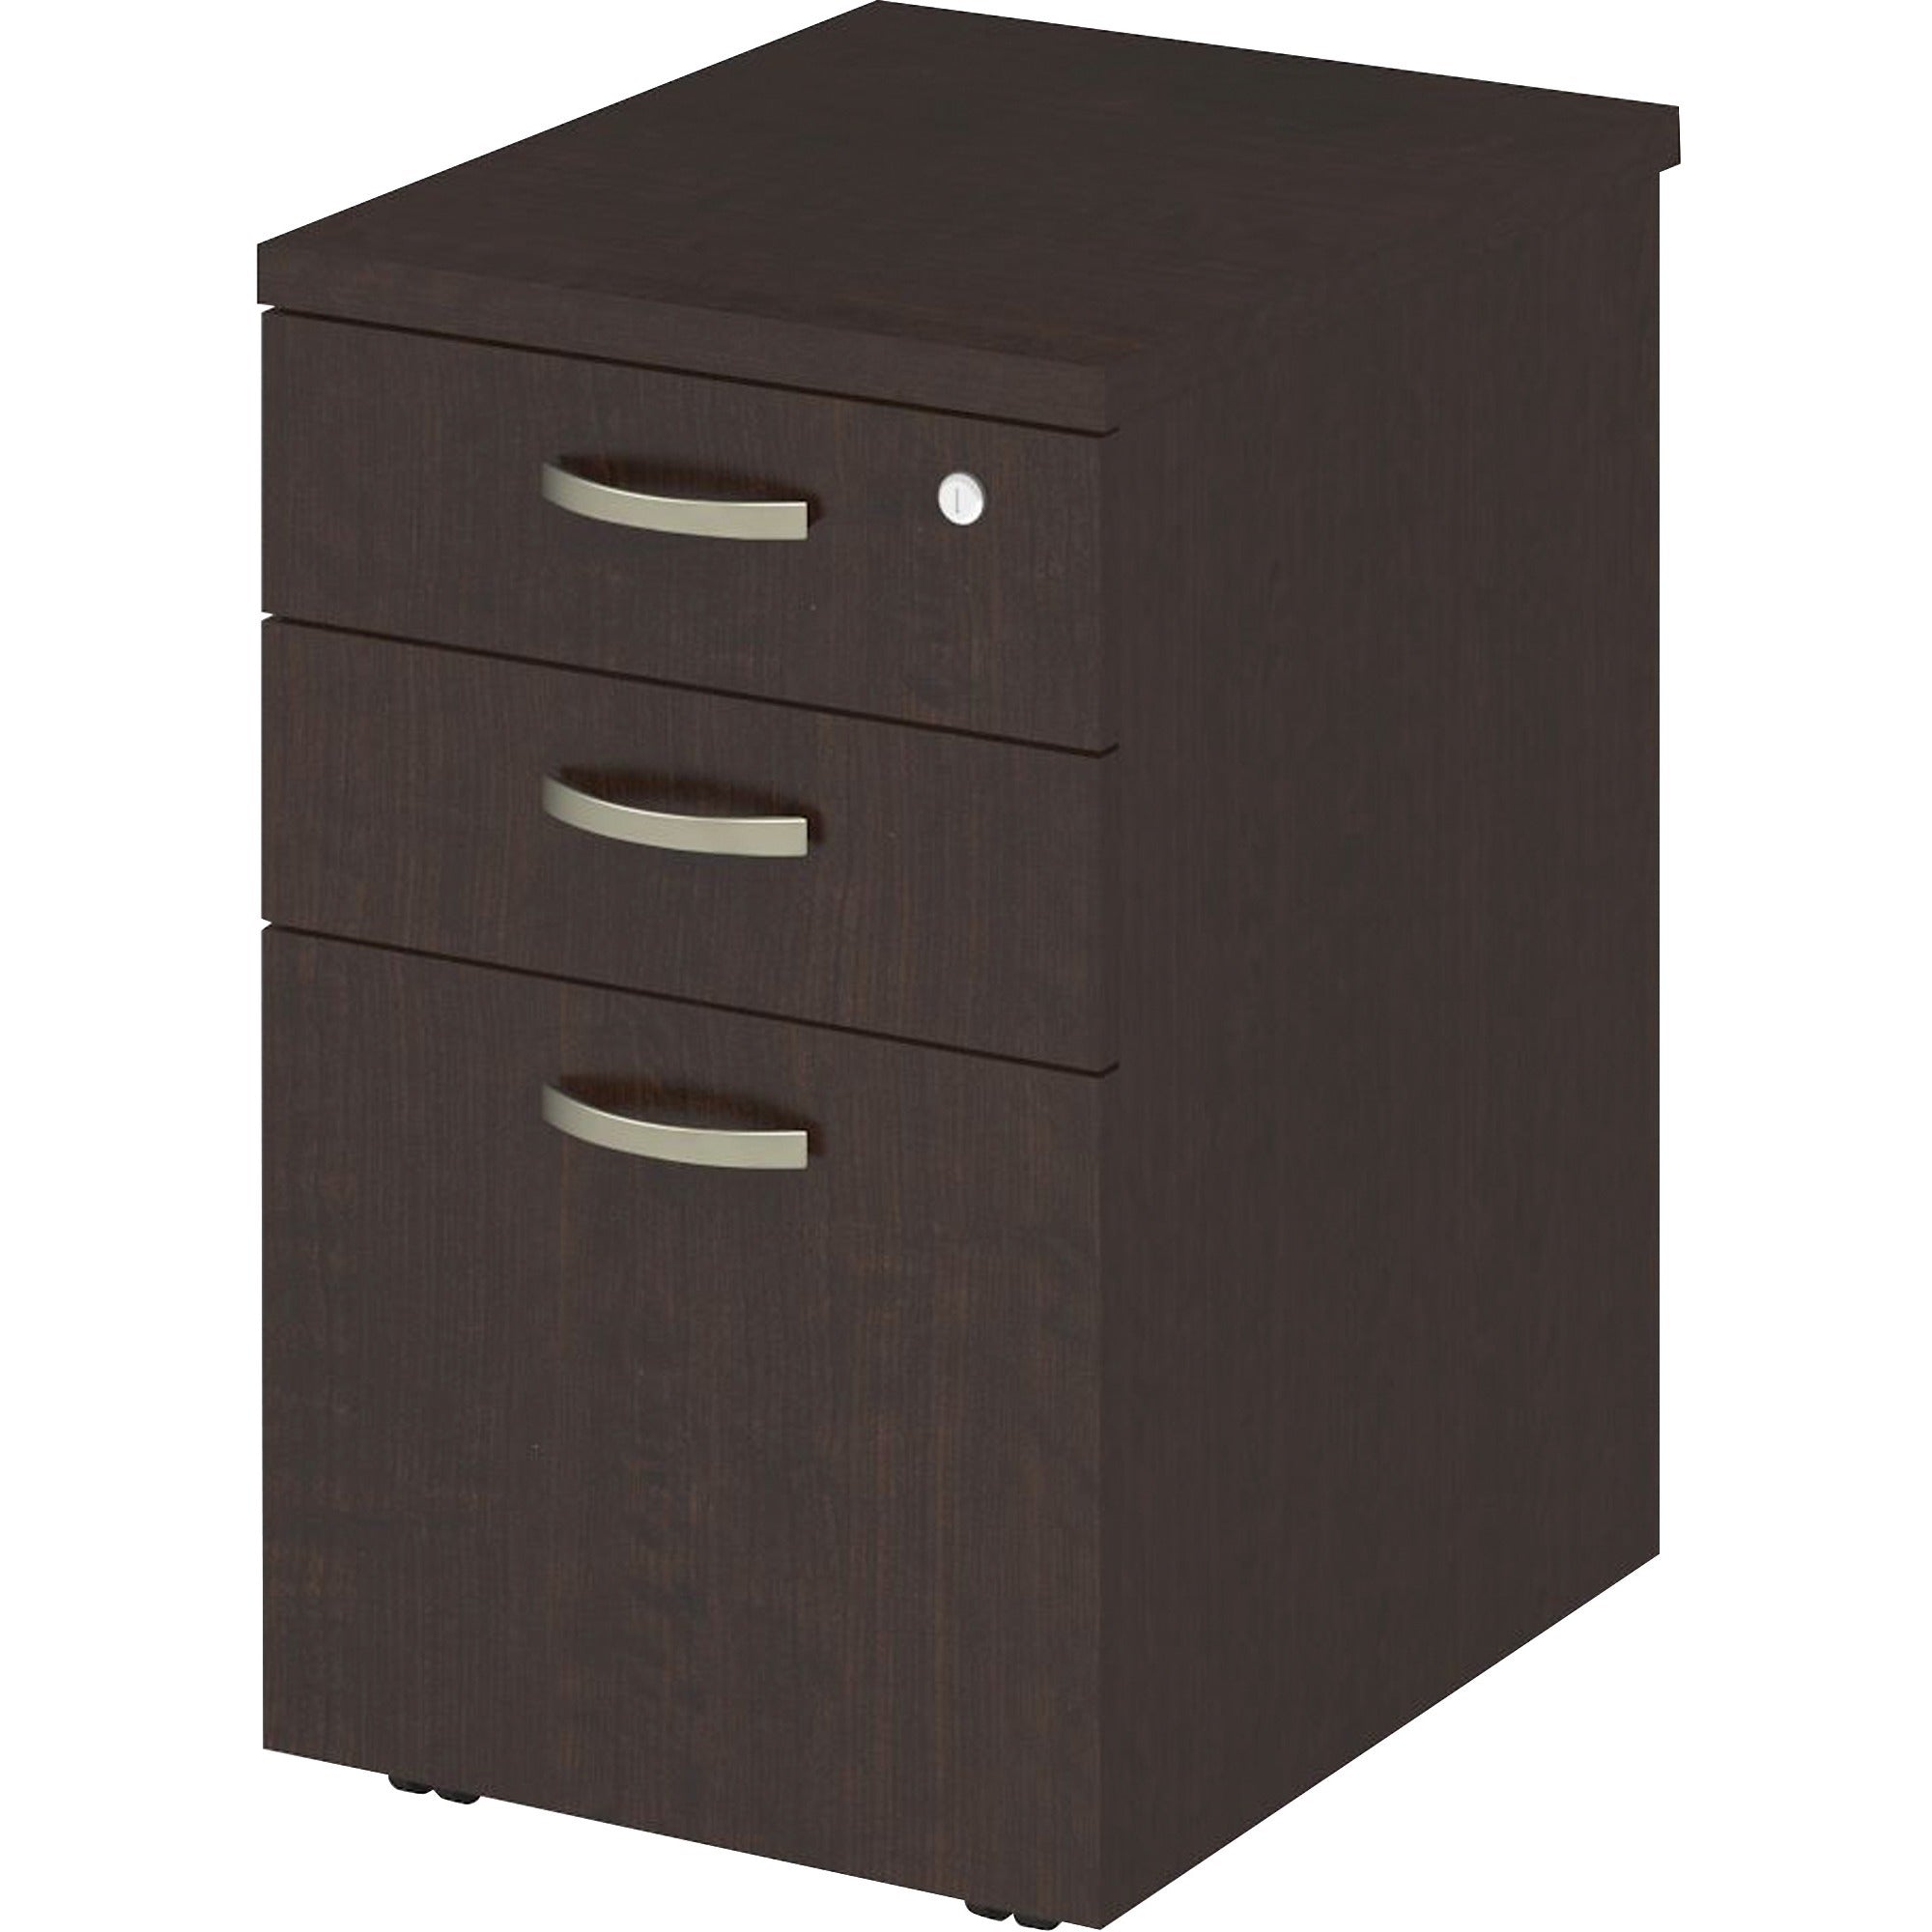 Bush Business Furniture Easy Office 16W 3 Drawer Mobile Pedestal - 16" x 20.1"25.4" - 3 x File, Box Drawer(s) - Material: Thermofused Laminate (TFL), Steel, Metal, Engineered Wood - Finish: Mocha Cherry, Laminate - 1